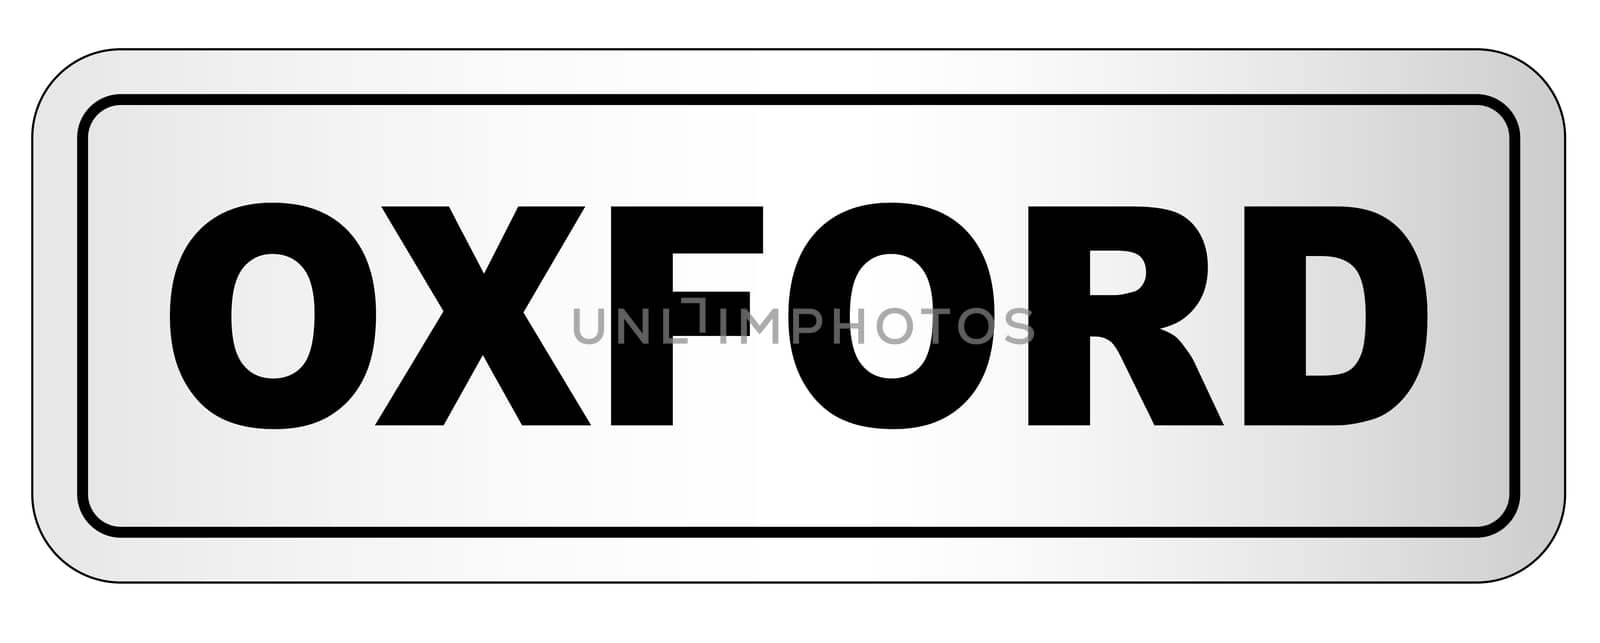 The city of Oxford nameplate on a white background